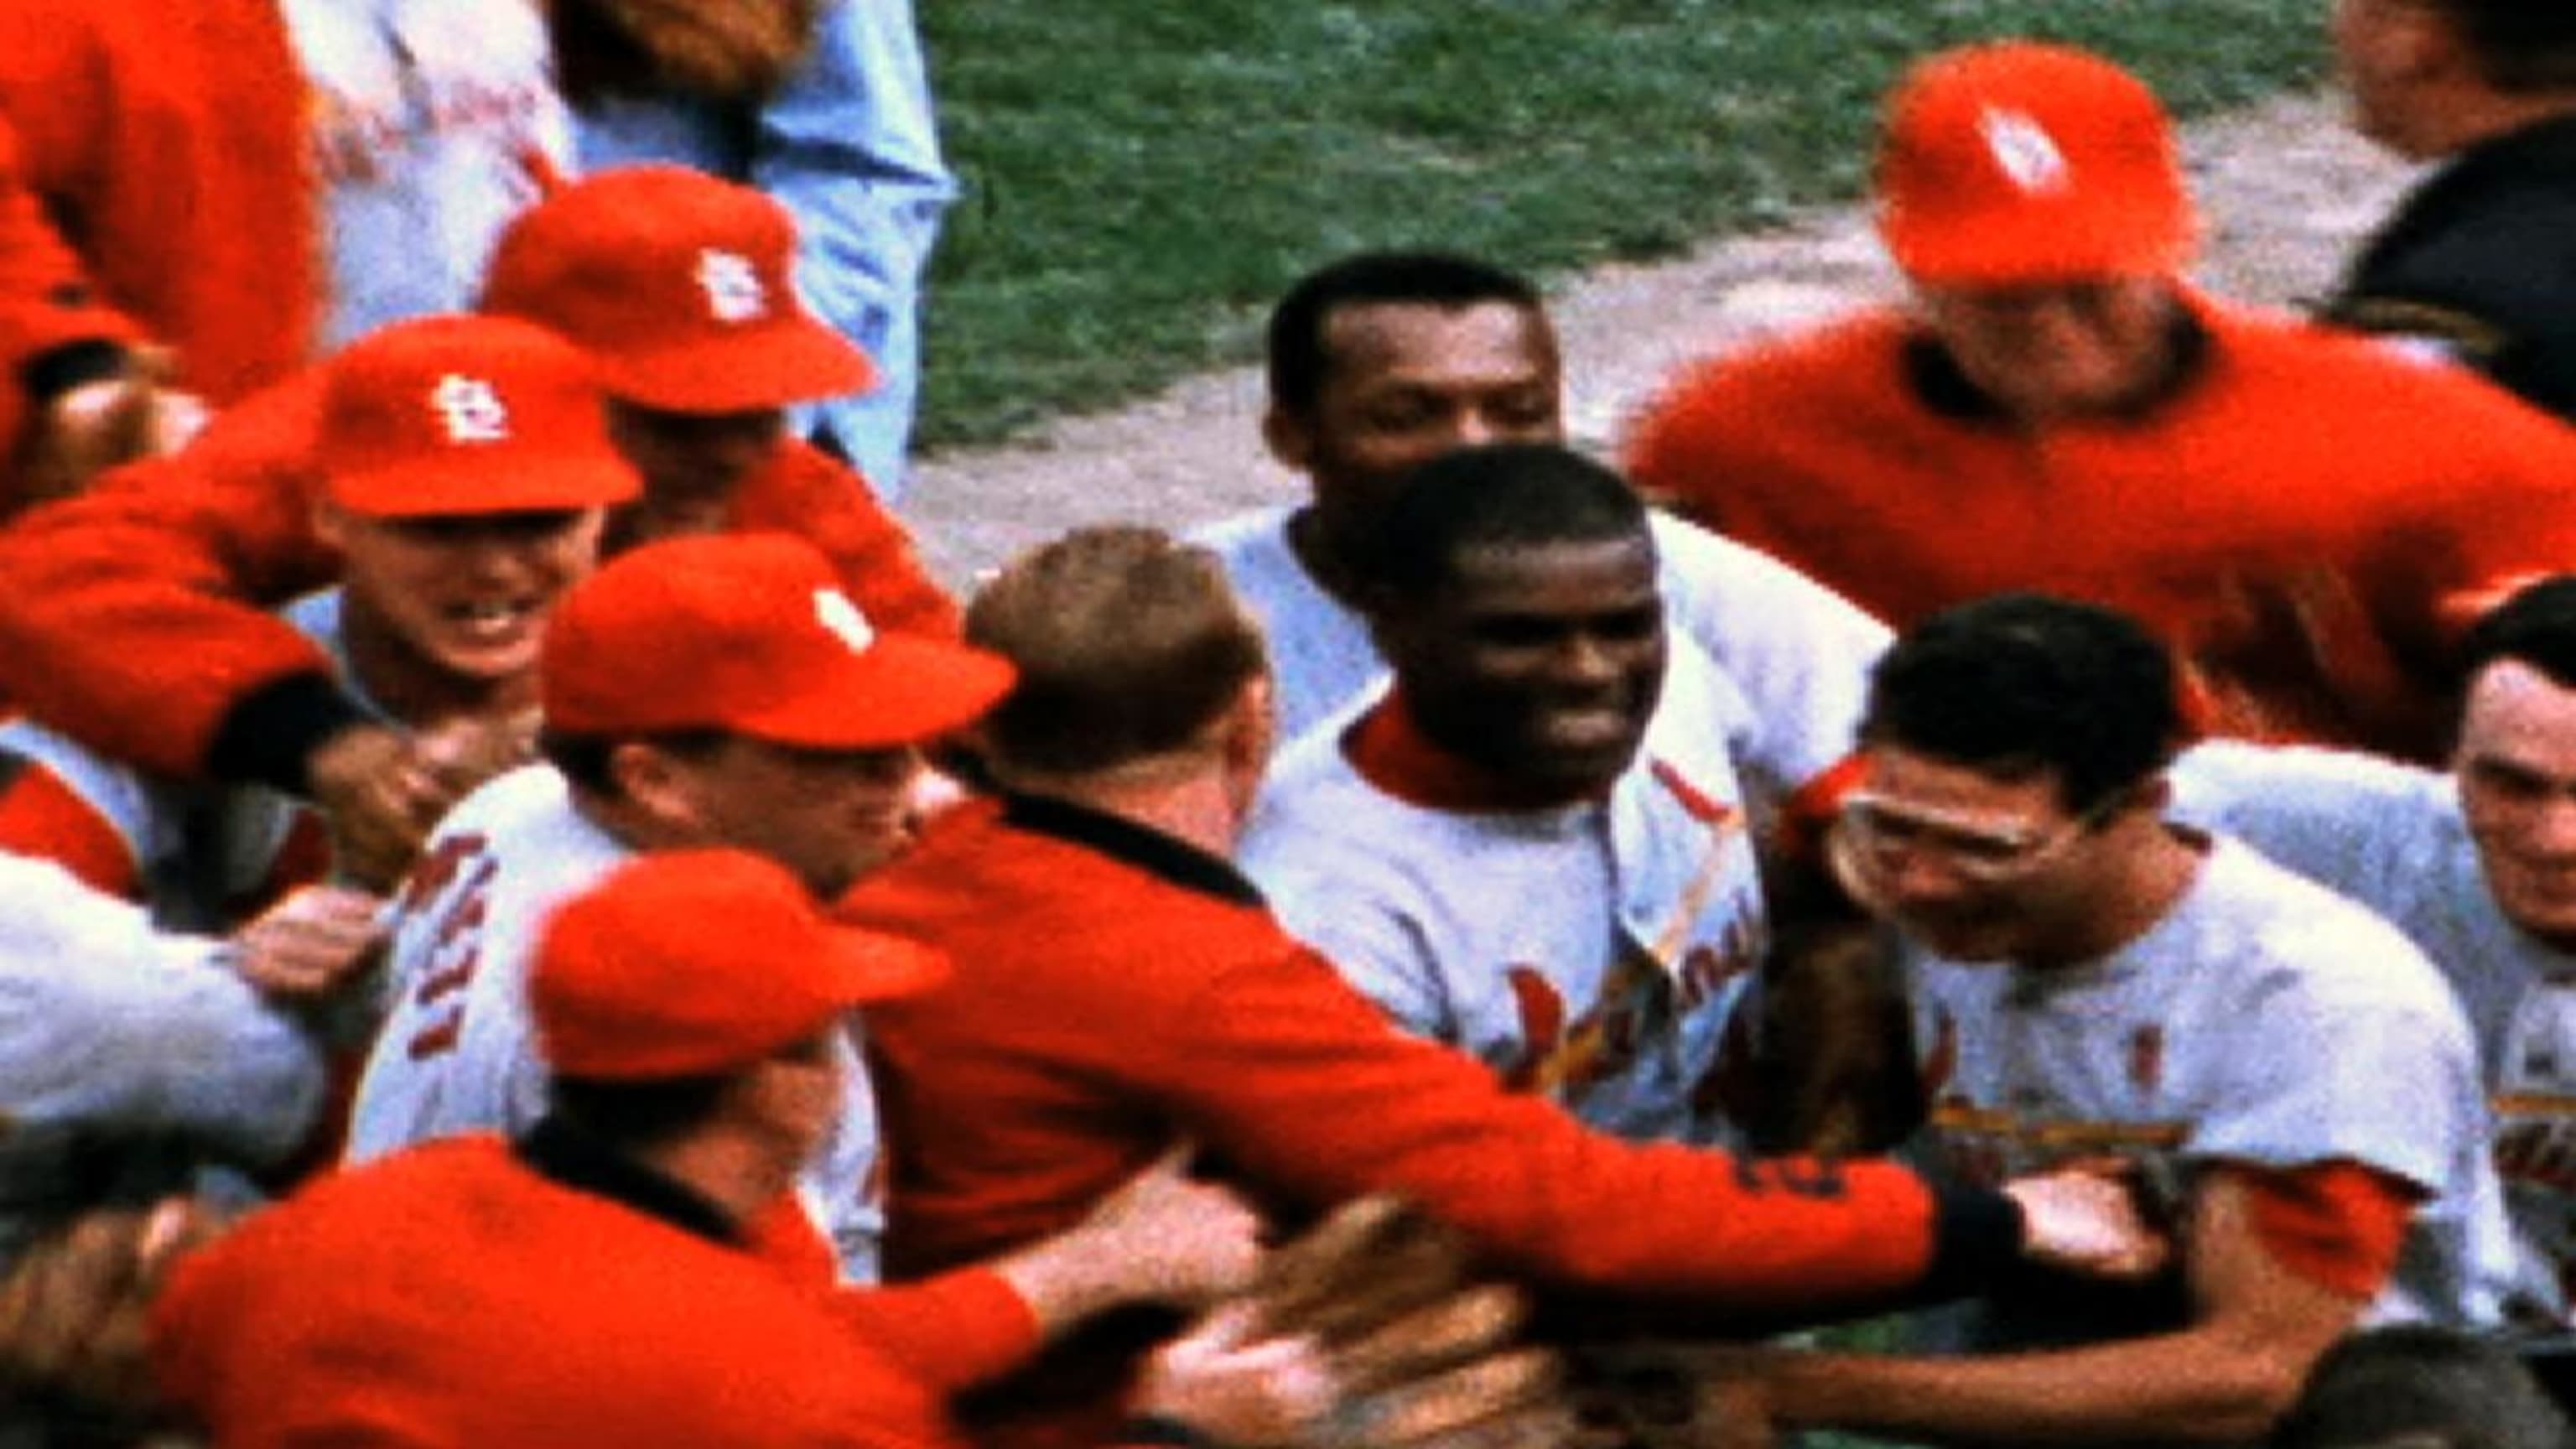 Bob Gibson hits a home run and strikes out 10 batters in leading the